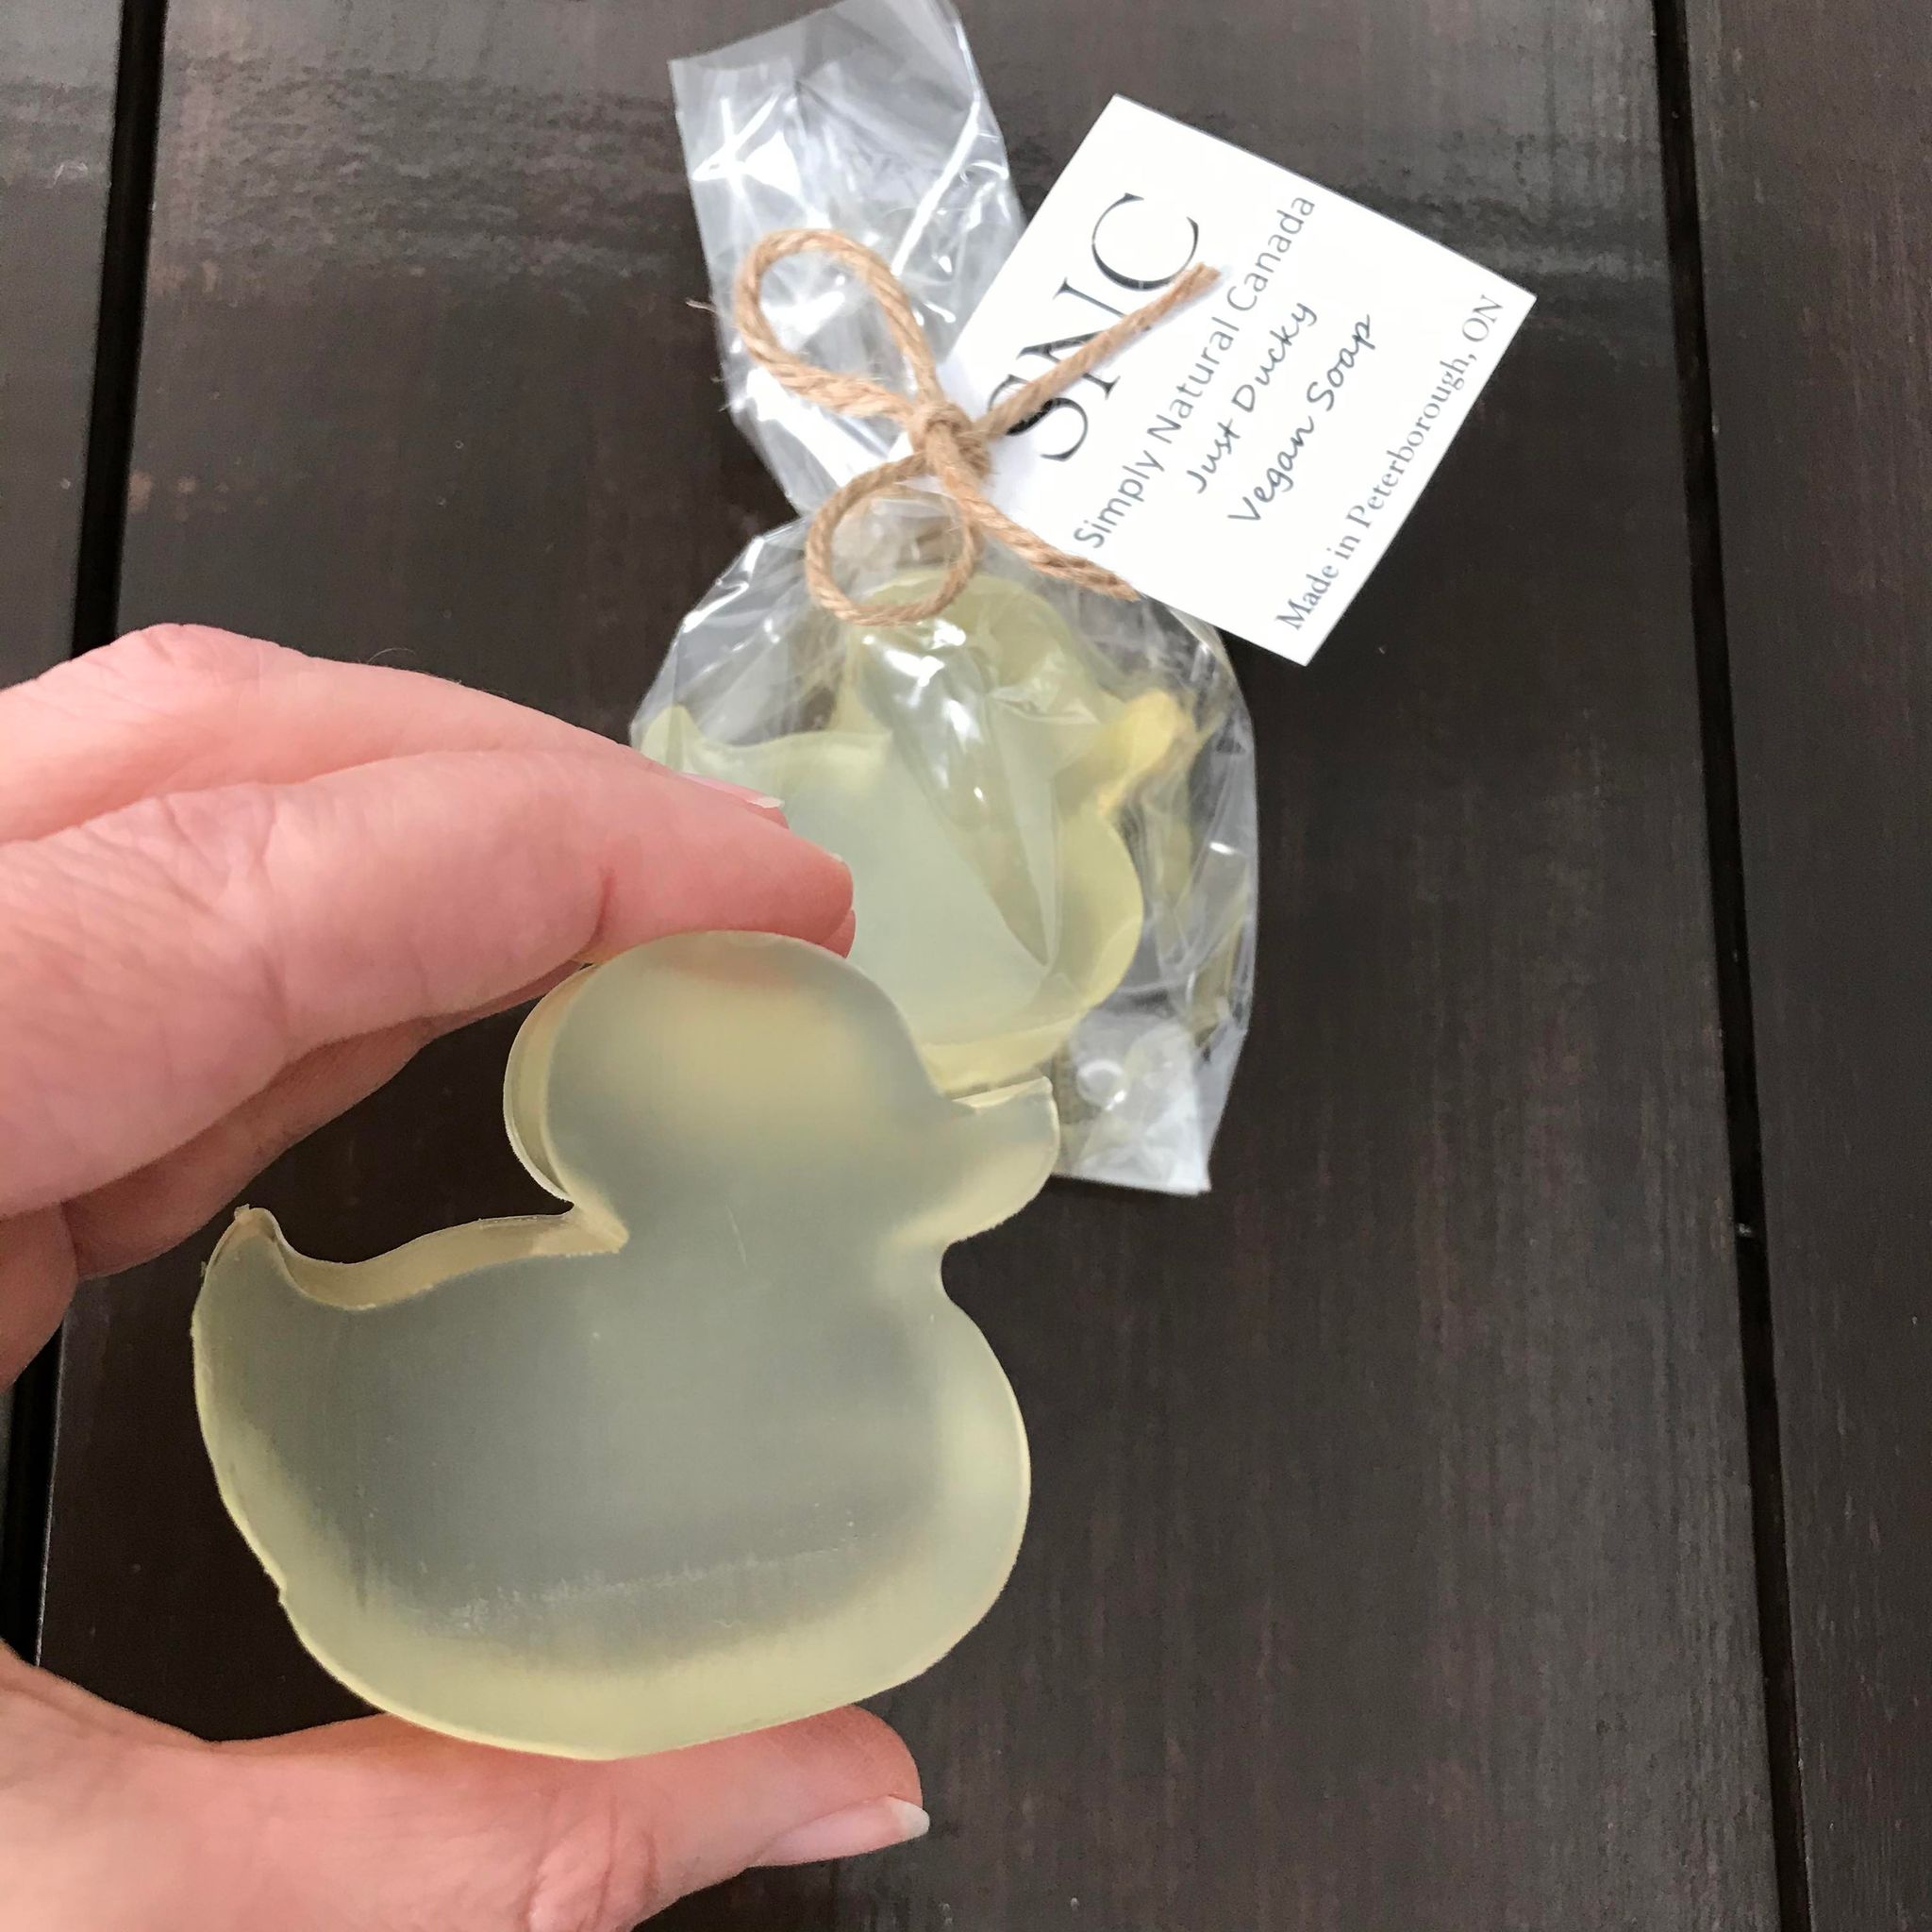 Canadian made vegetable glycerin yellow ducky soap in compostable bags made by Simply Natural Canada in small batches